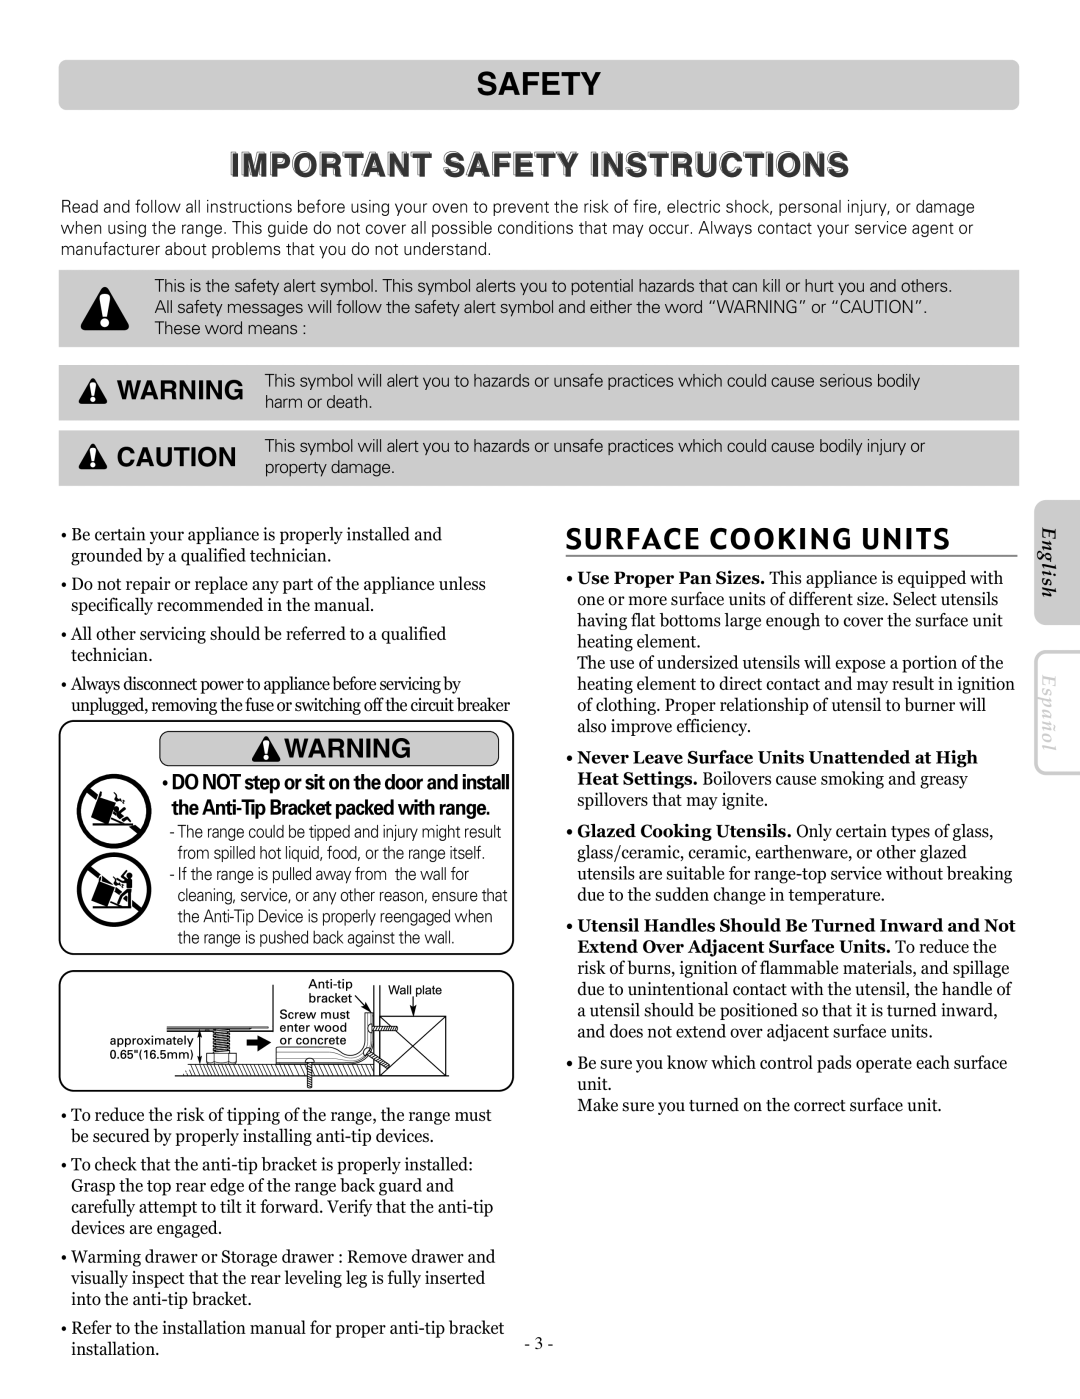 LG Electronics LRE30453SW, LRE30453ST Important Safety Instructions, Surface Cooking Units, English, Español 